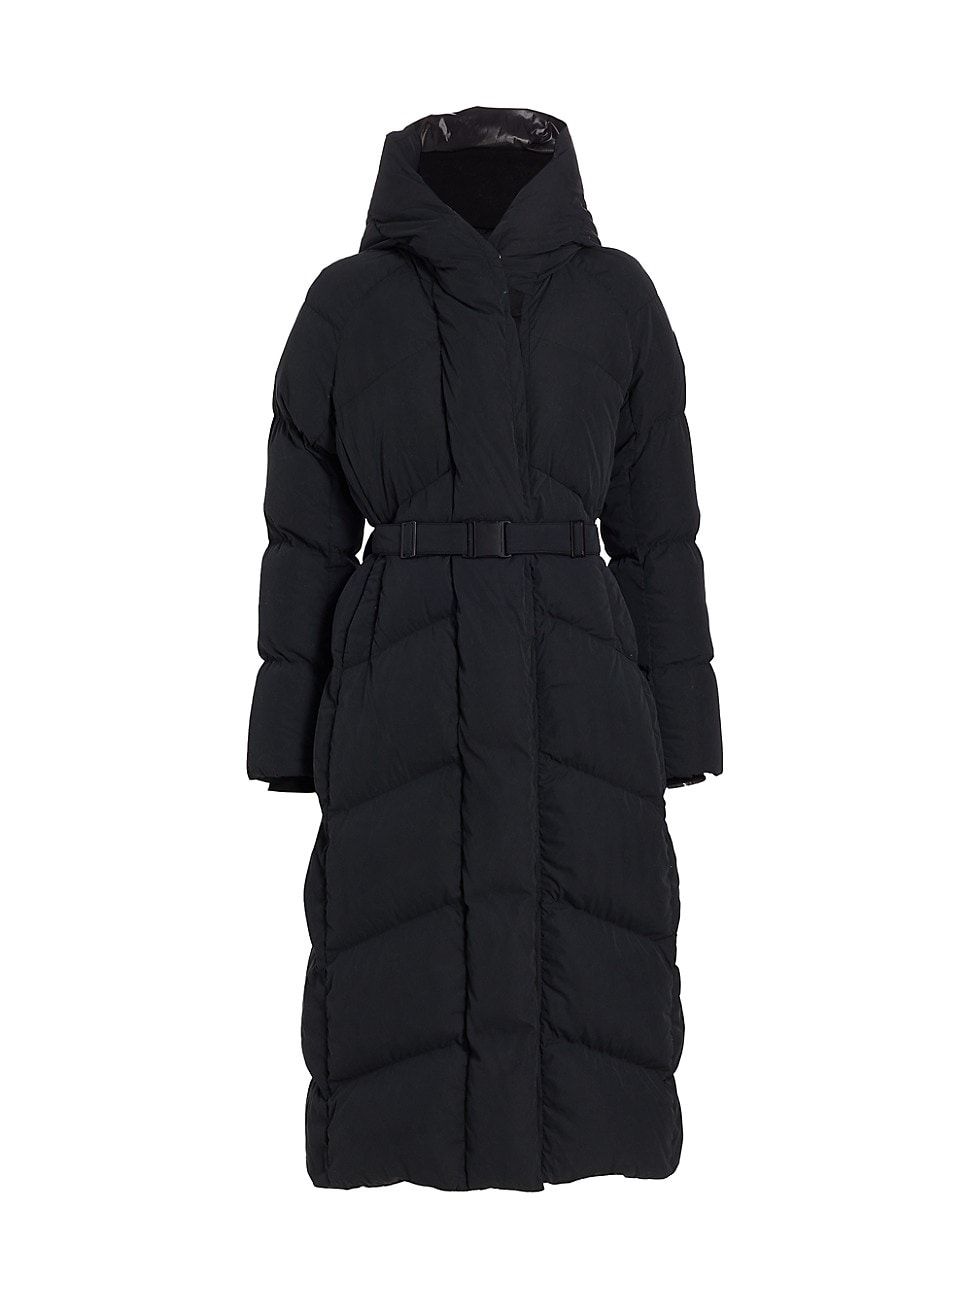 Women's Marlow Quilted Parka Jacket - Black - Size Large | Saks Fifth Avenue